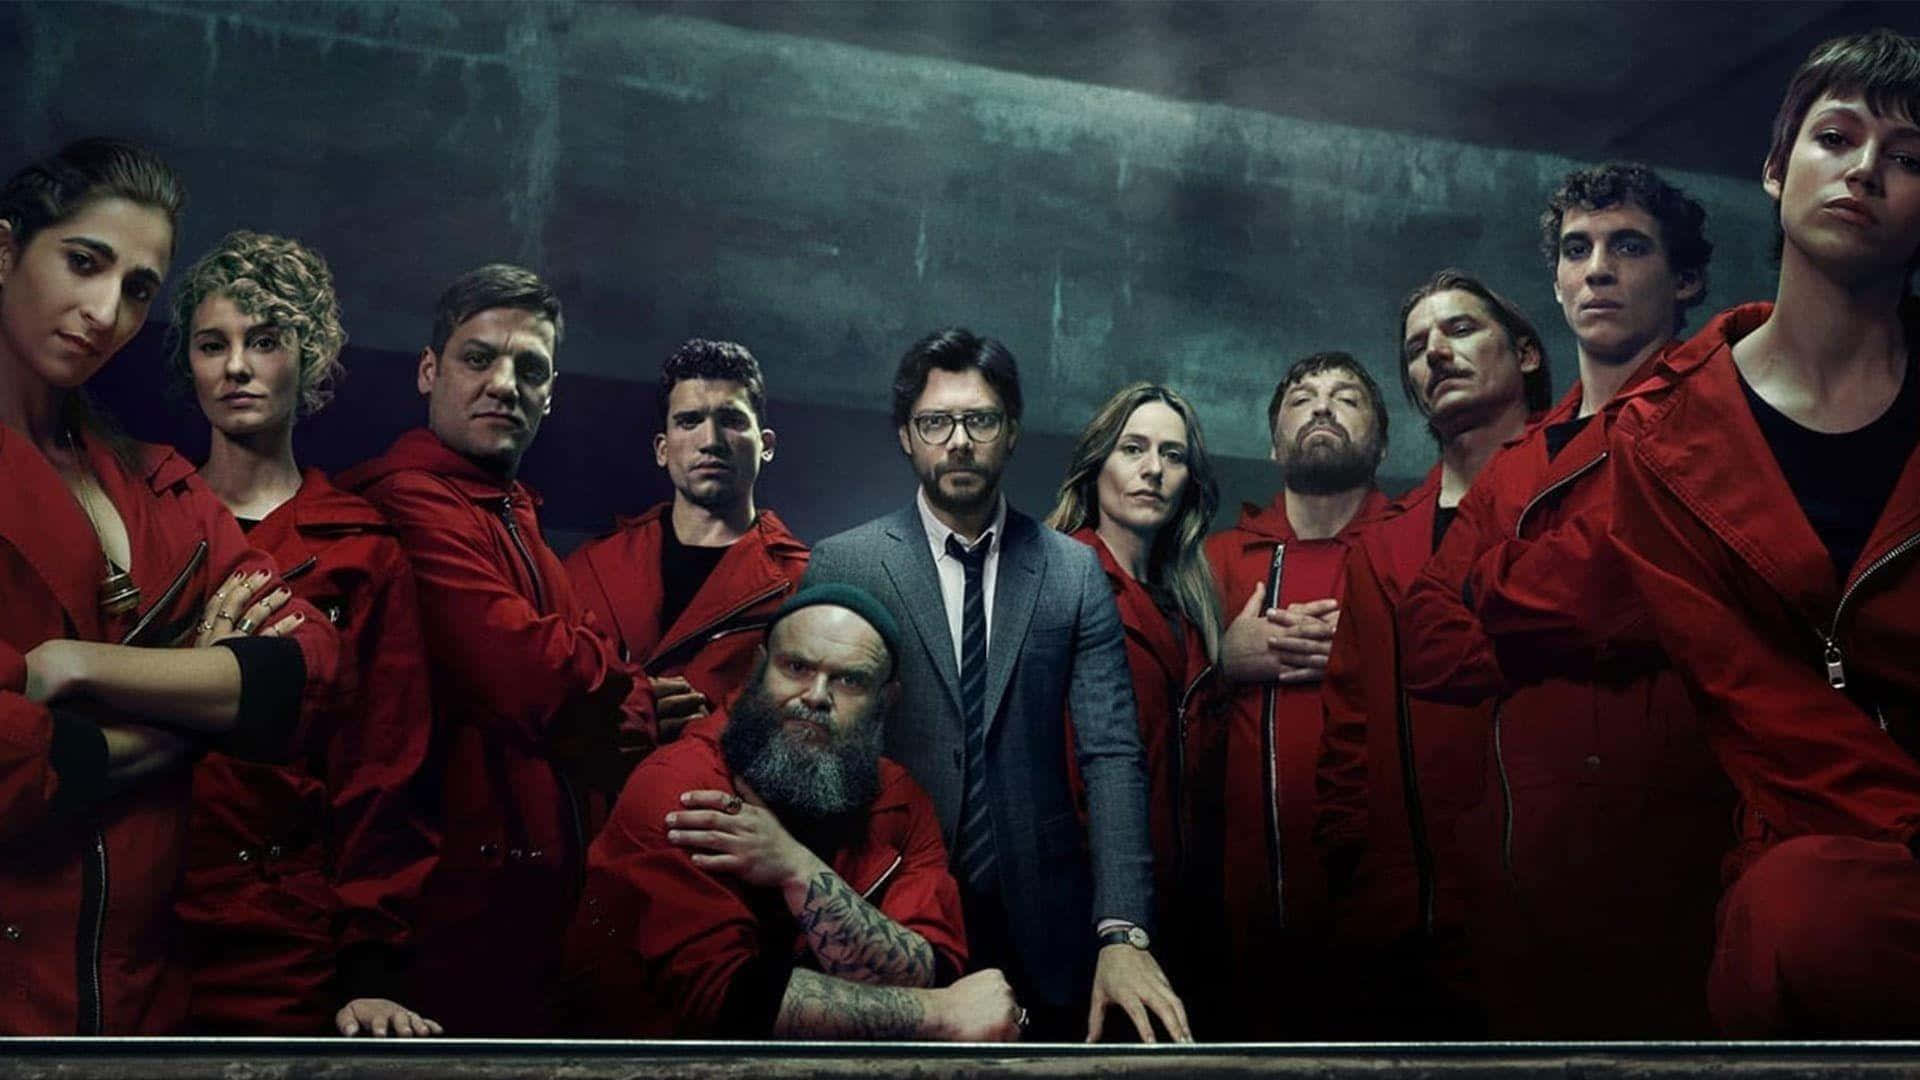 An inside look at the team behind the famous Money Heist.